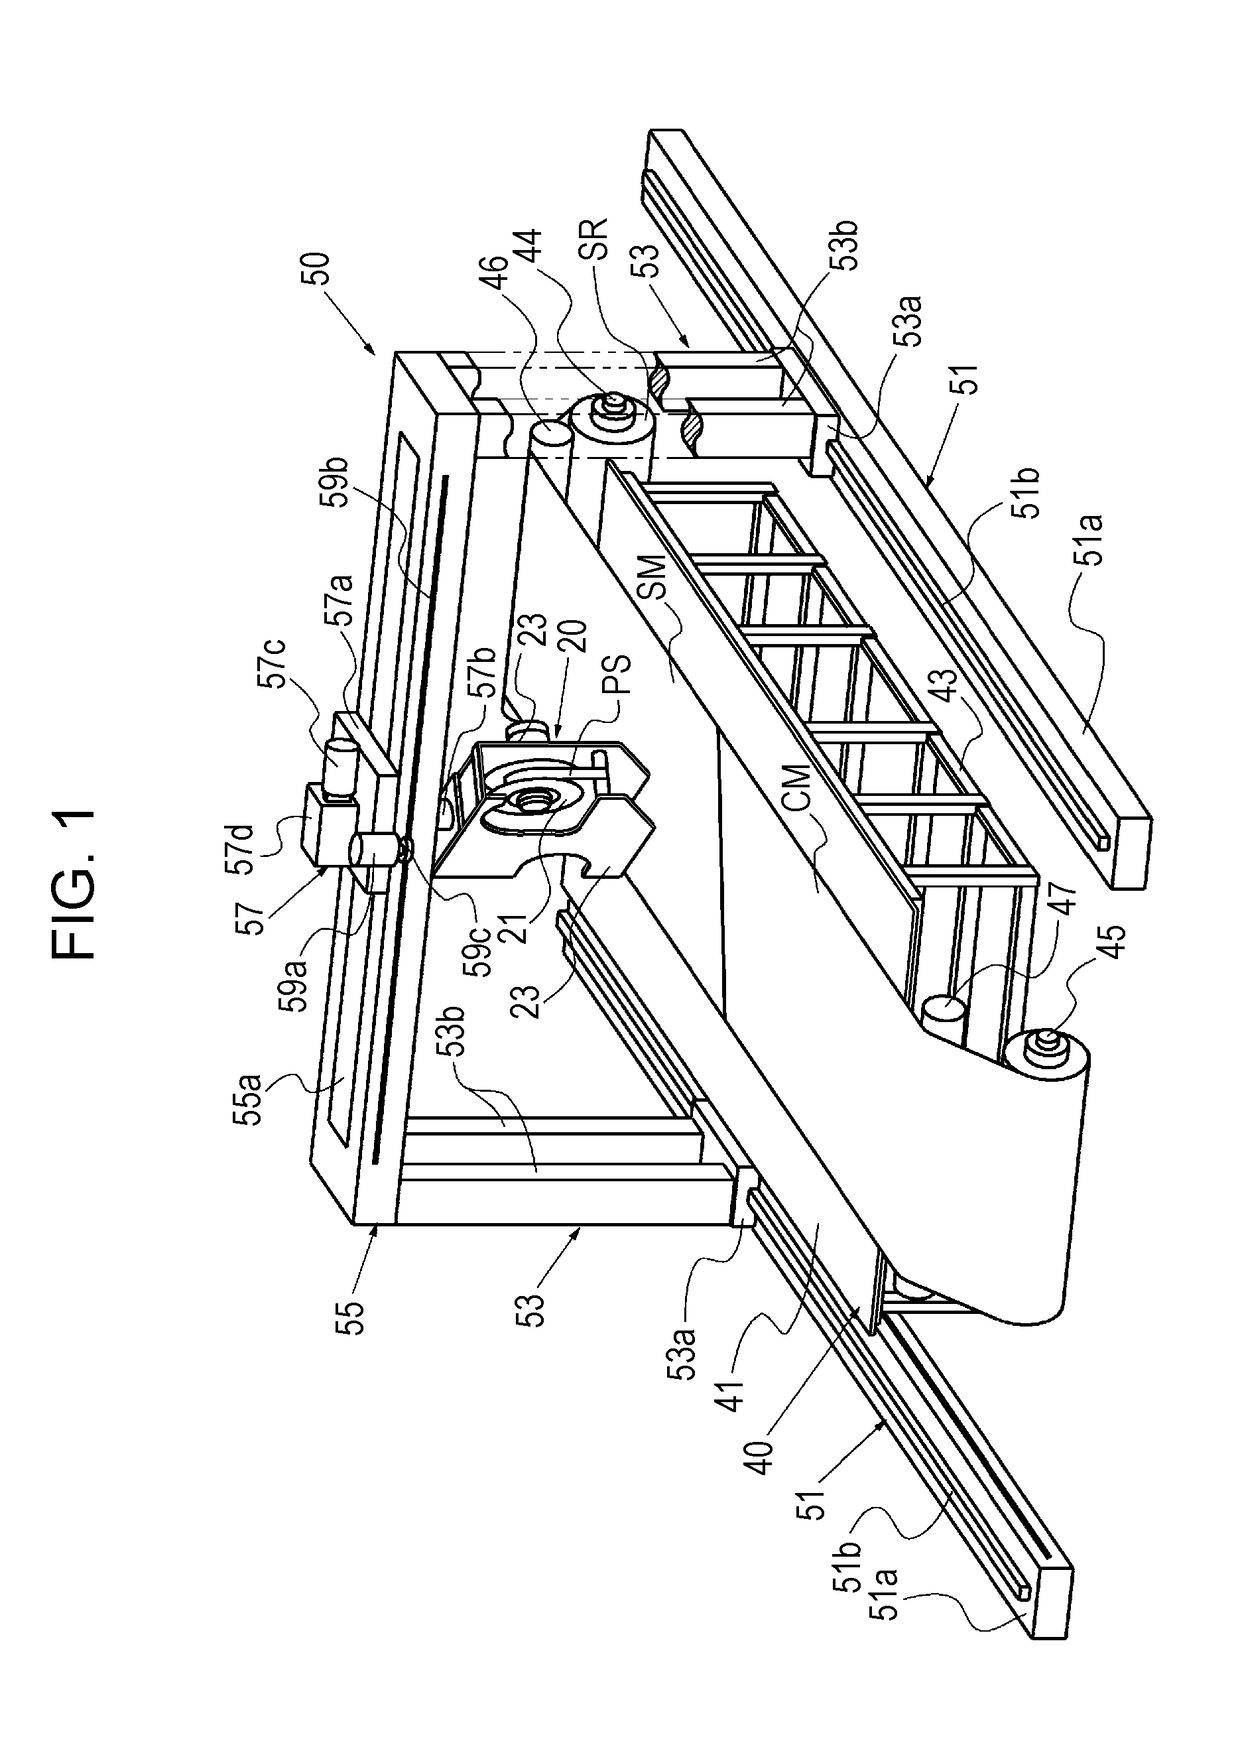 Feed device for reinforcing fiber material and method for cutting reinforcing fiber material by using the feed device